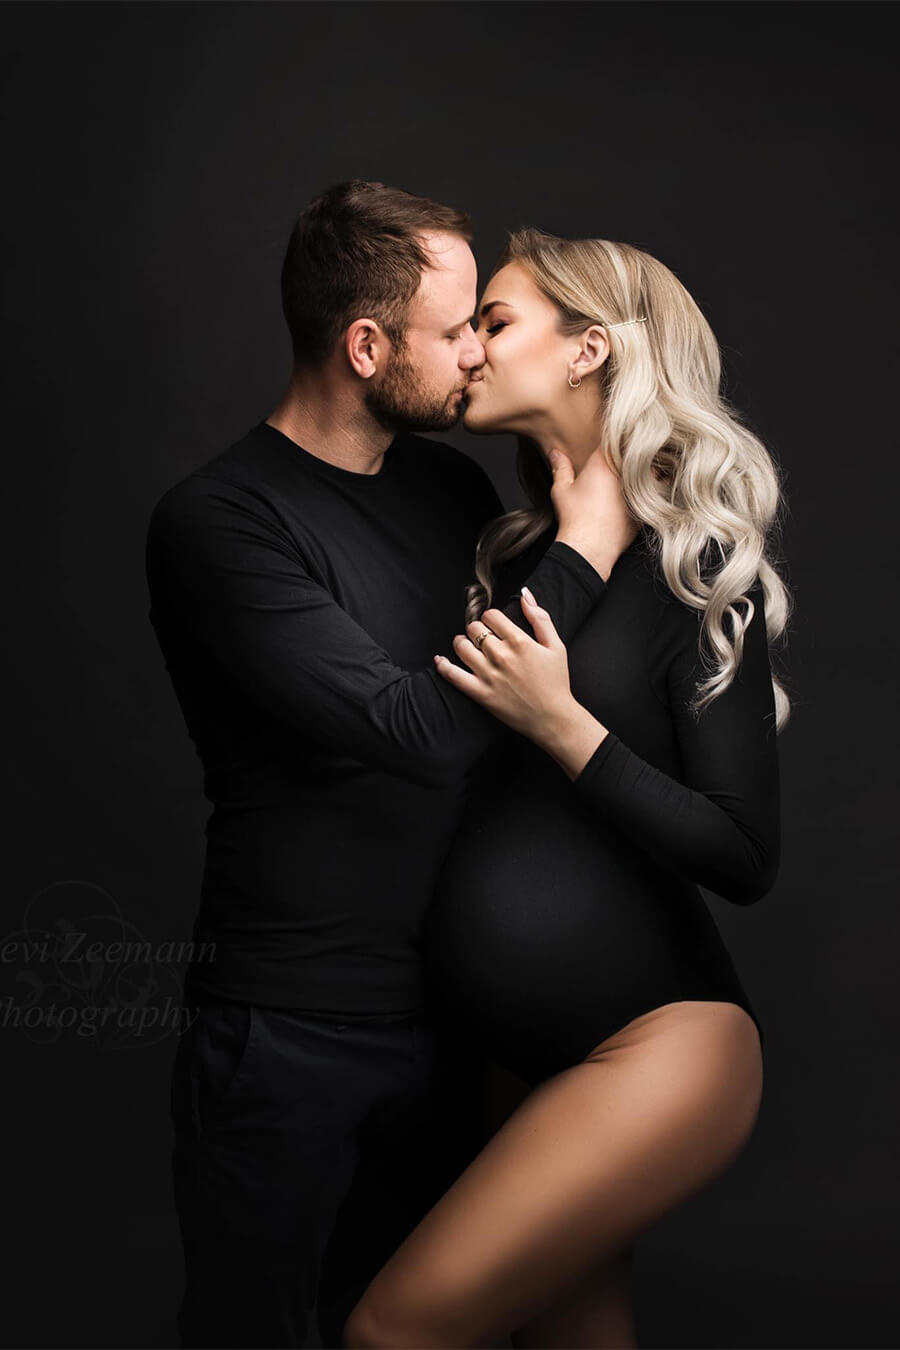 couple posing in a photography studio. They are kissing each other. Both are wearing black. The male is wearing a black t-shirt with long sleeves and the woman is pregnant and wears a black bodysuit with turtleneck and long sleeves.